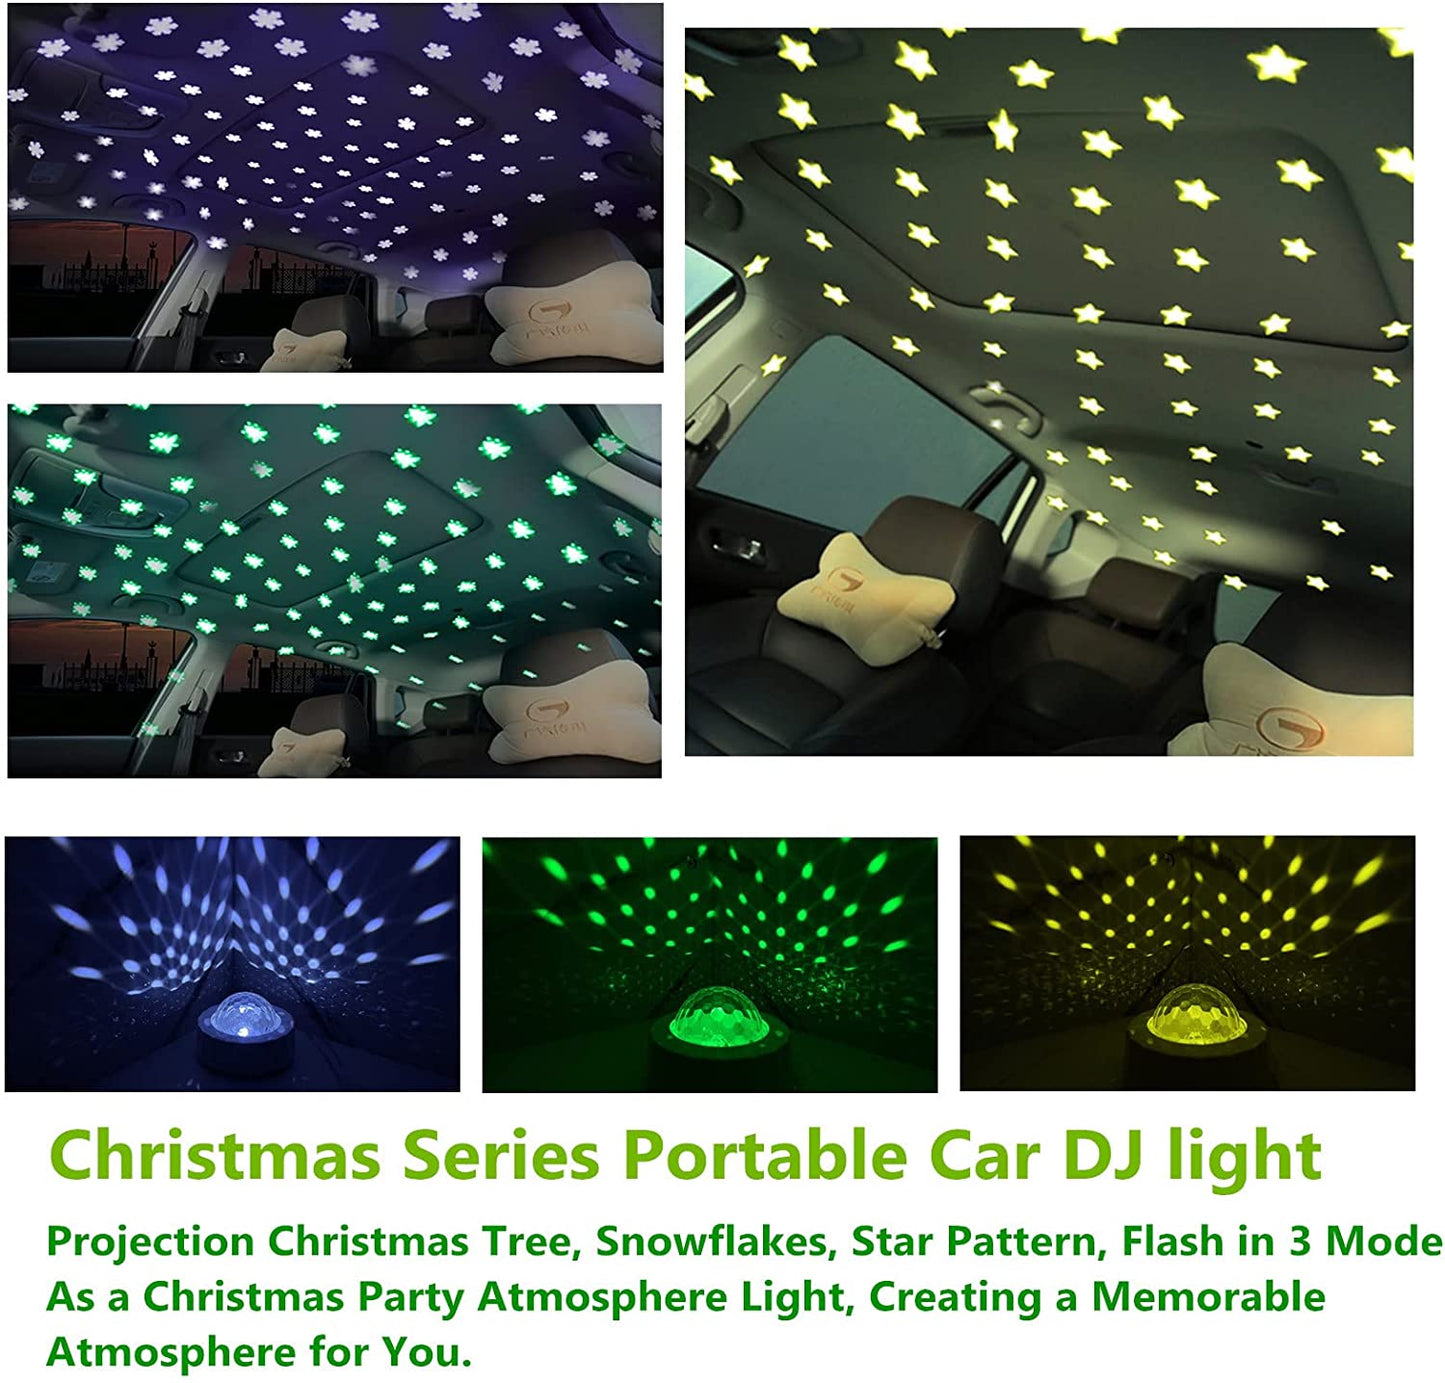 Telbum Mini Party Light for Christmas,Sound Activated DJ Music Rhythm Strobe Light,Battery Operated